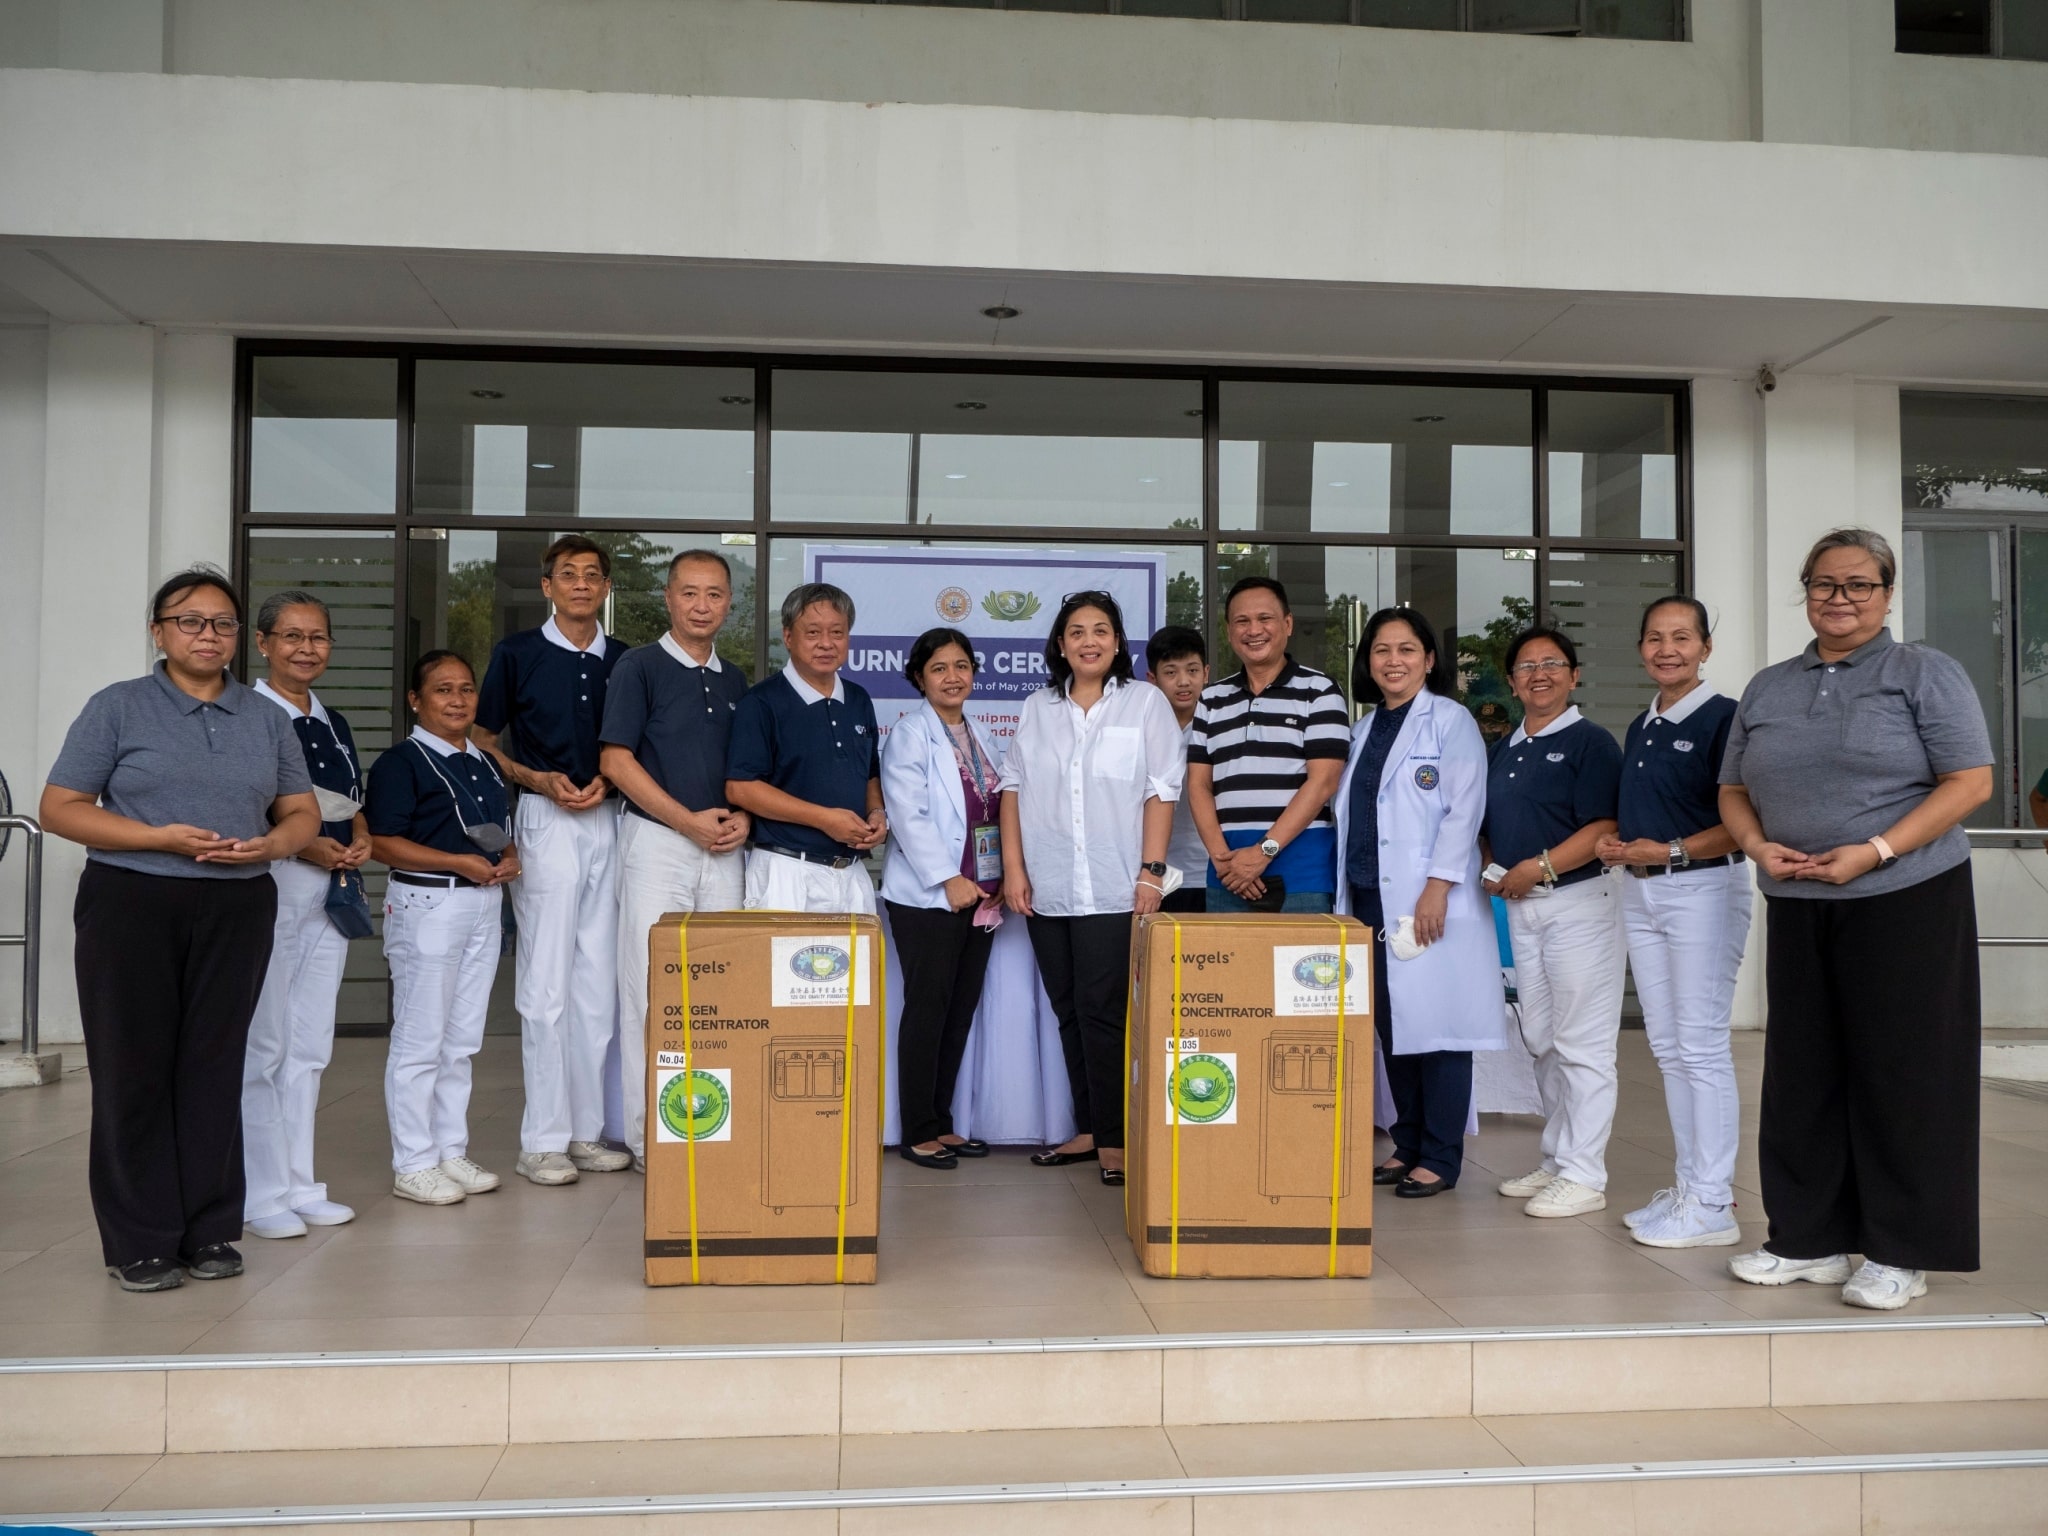 Tzu Chi volunteers and staff pose for a group photo with Governor Nina Ynares (in white), Vice Governor Junrey San Juan Jr. (in stripes), and doctors at Casimiro A. Ynares Sr. Memorial Hospital. 【Photo by Matt Serrano】